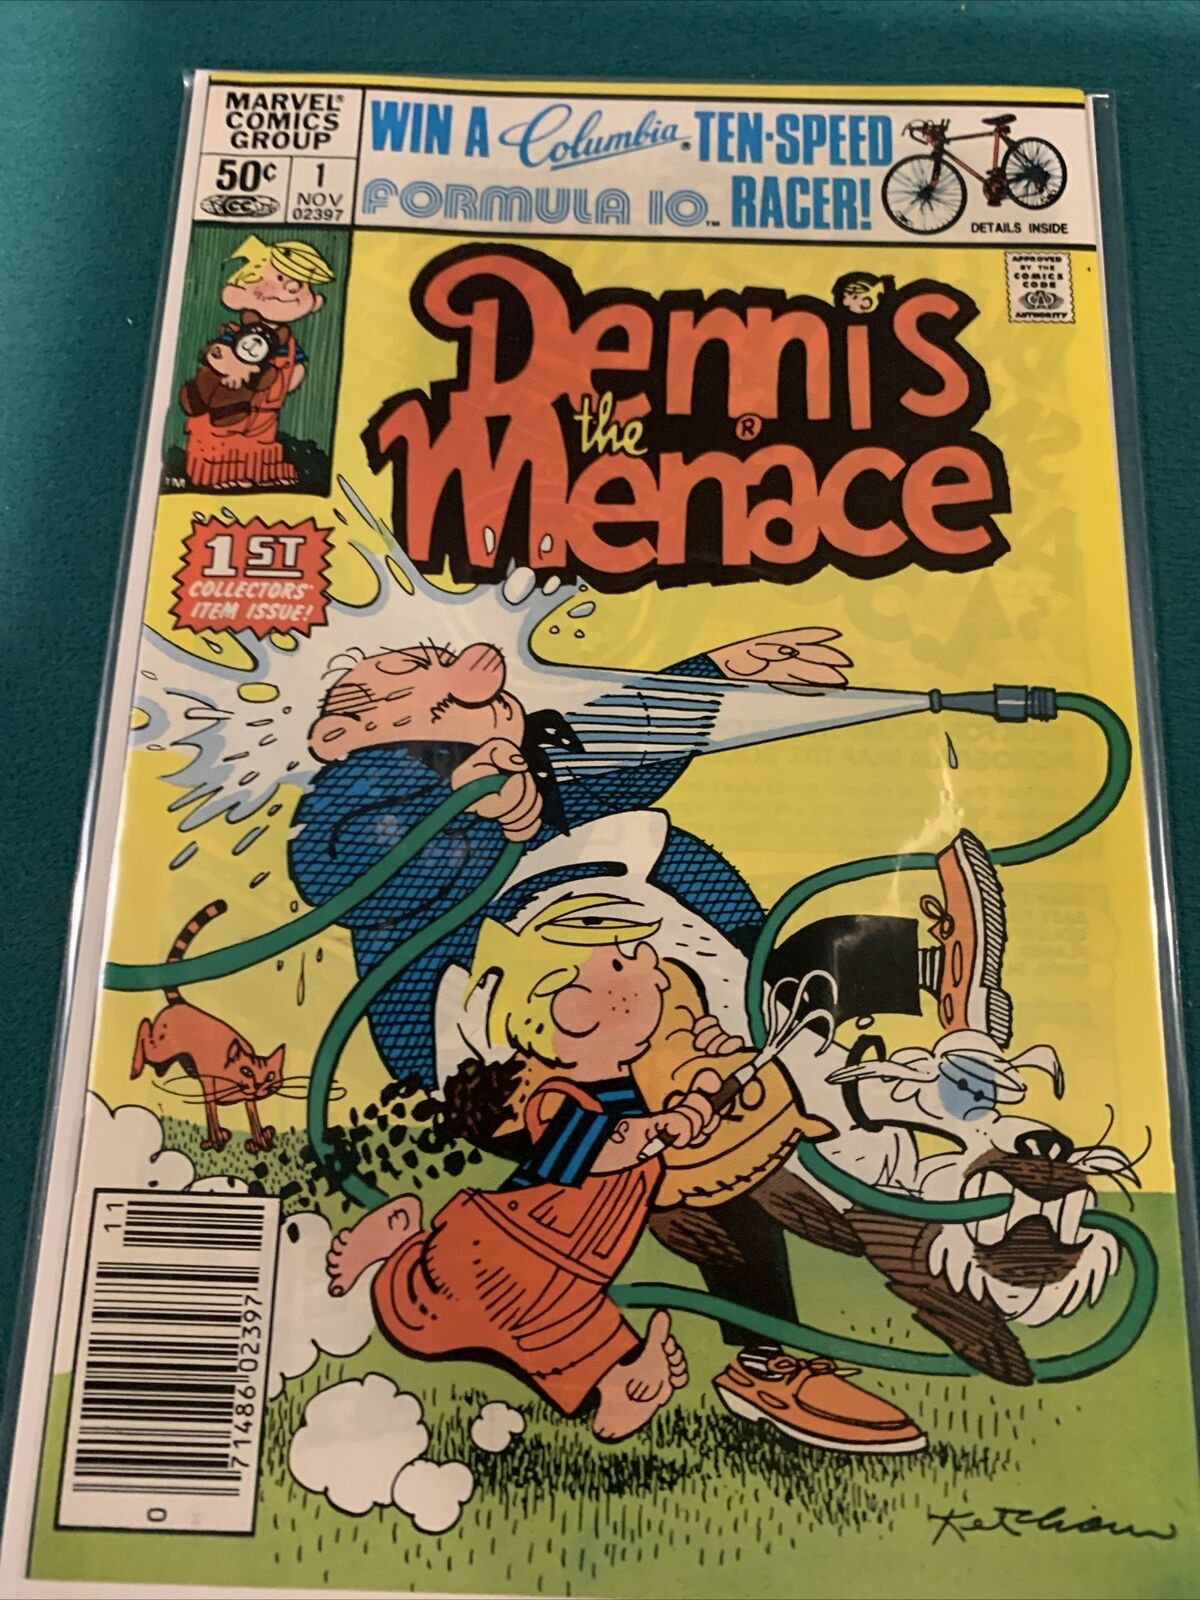 DENNIS THE MENACE #1 NEWSSTAND EDITION (FN) BRONZE AGE MARVEL COMICS, CLASSIC TV